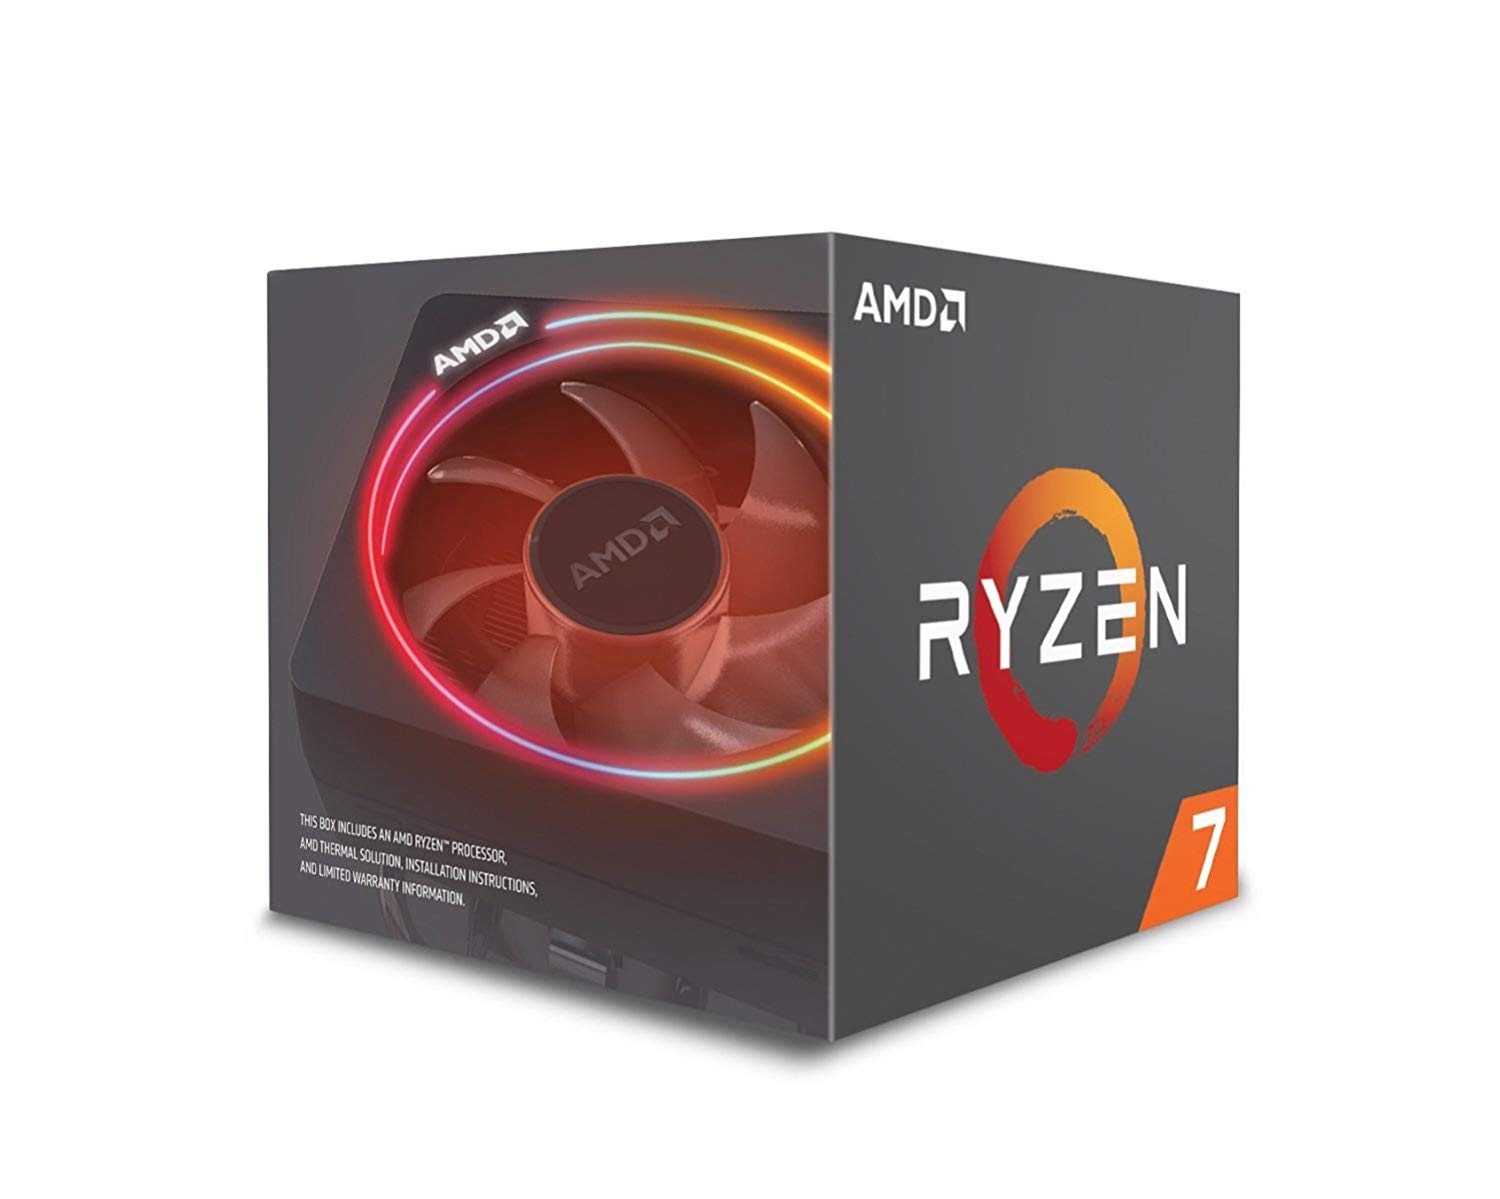 Amd S Ryzen 7 2700x Is On Sale Now At Over 50 Off Its Launch Price Tom S Hardware